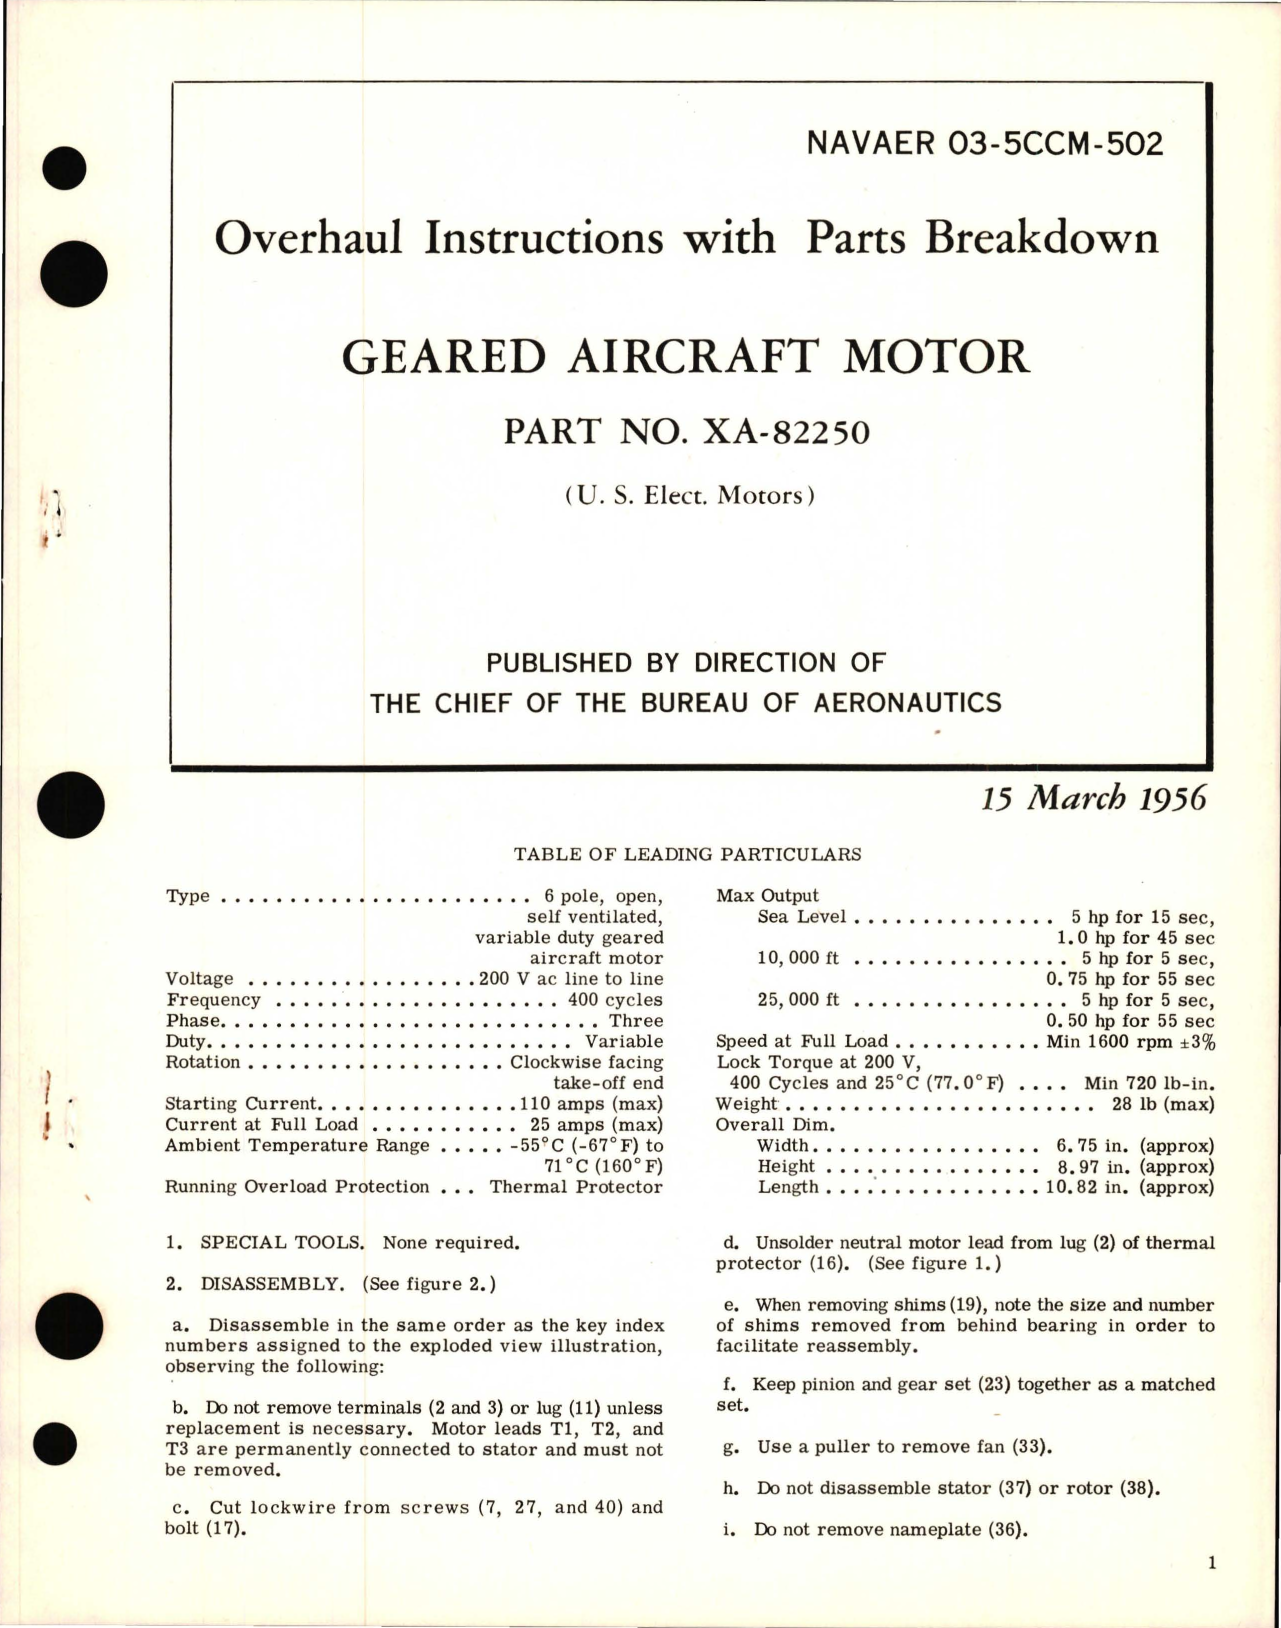 Sample page 1 from AirCorps Library document: Overhaul Instructions with Parts Breakdown for Geared Aircraft Motor - Part XA-82250